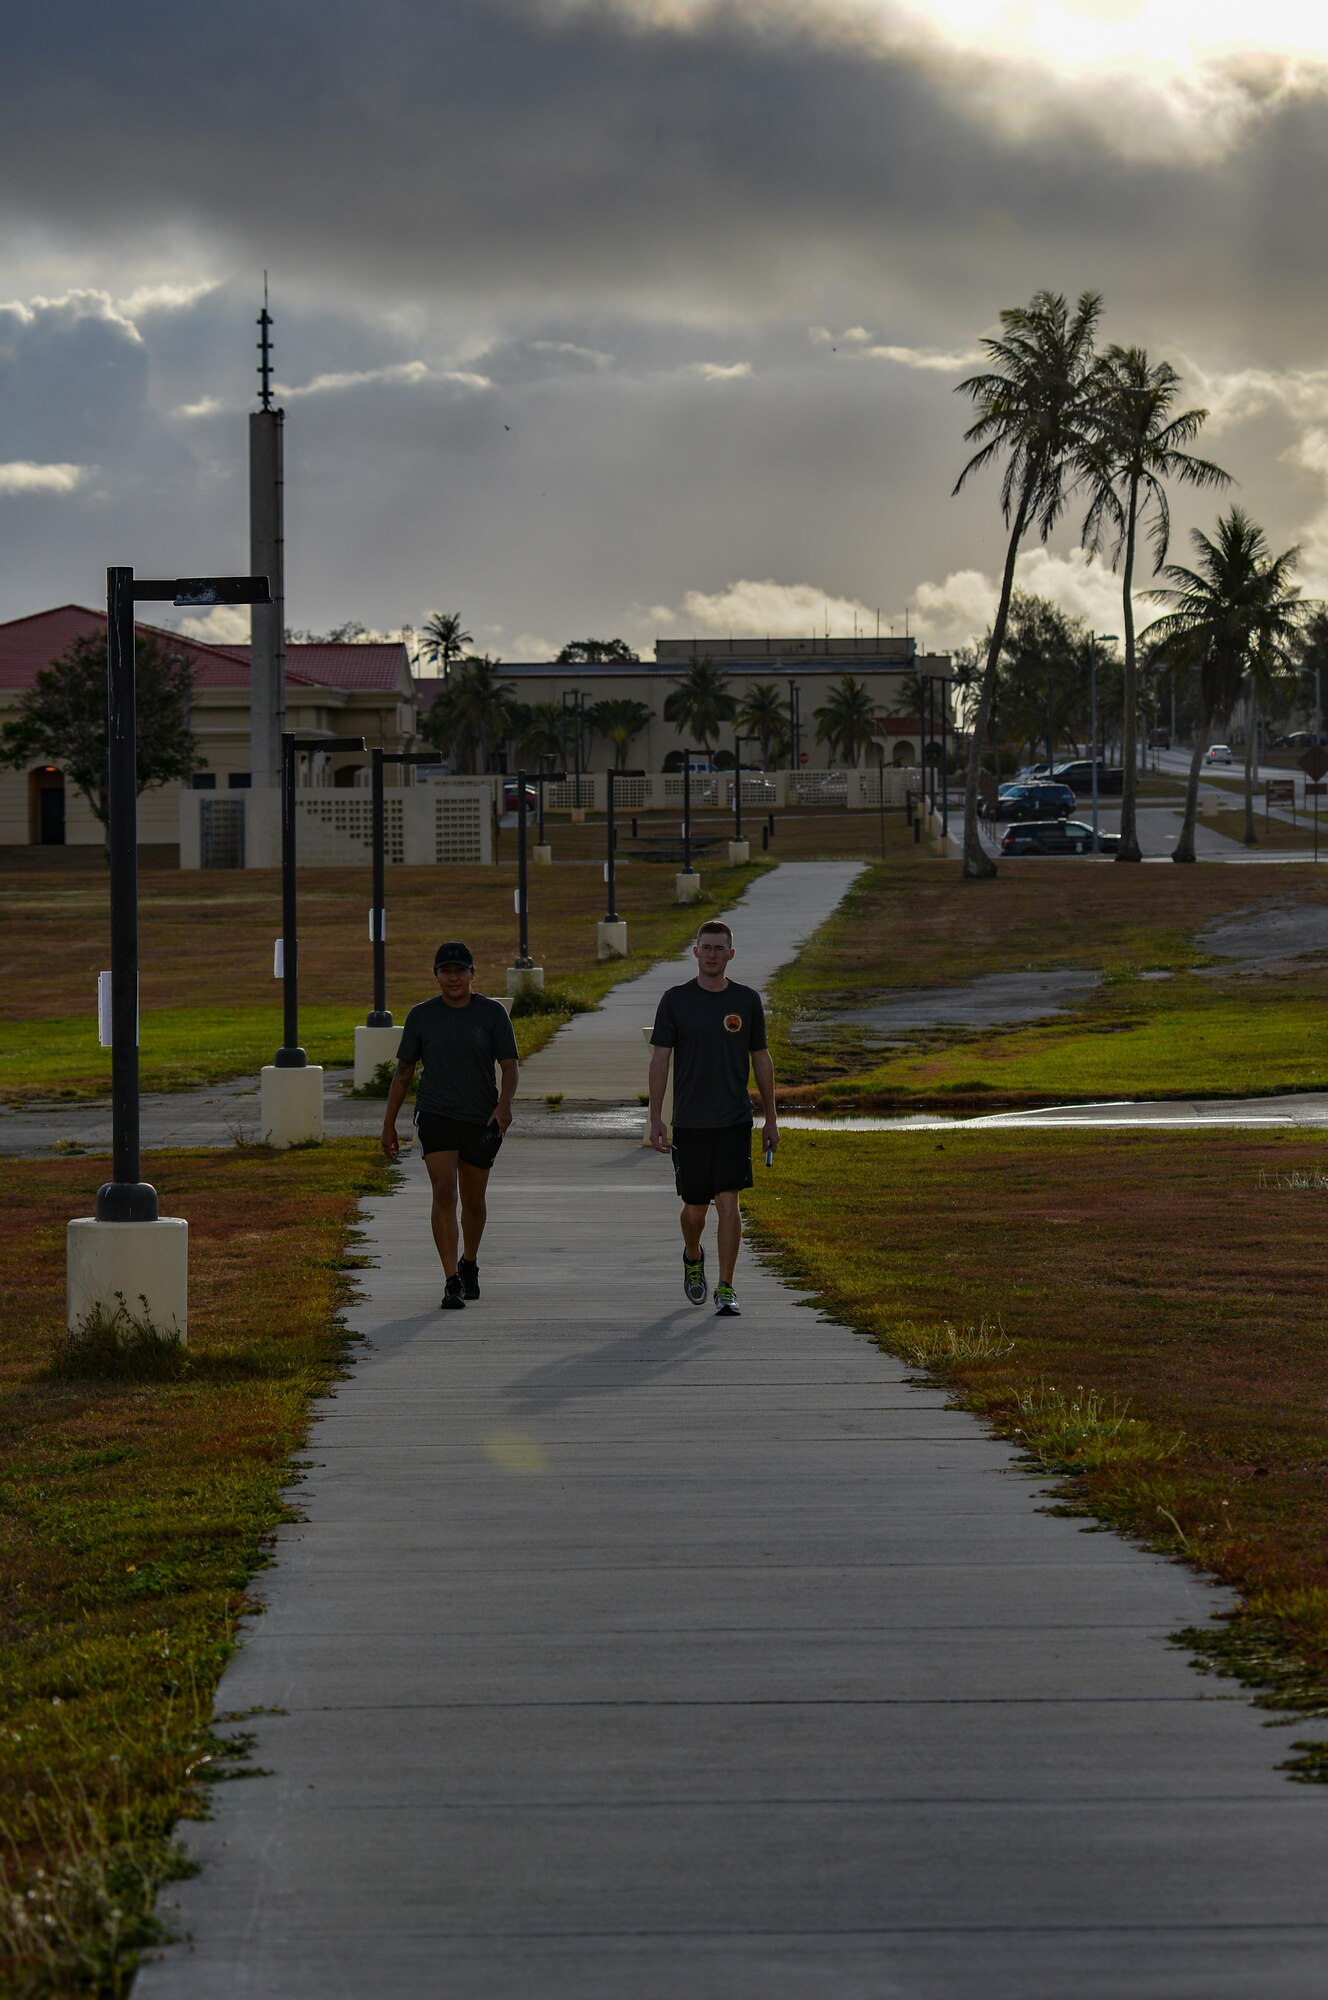 Staff Sgt. Collin Wanberg, right,  and Airman 1st Class Jasmine Mora, walk with a rememberance baton during the Holocaust Memorial Walk May 26, 2016, at Andersen Air Force Base, Guam. Team Andersen commemorated the the victims of the holocaust with an 11-hour vigil walk past the names and stories of victims. Wanberg and Mora are with the 36th Munitions Squadron. (U.S. Air Force photo by Staff Sgt. Alexander W. Riedel/Released)